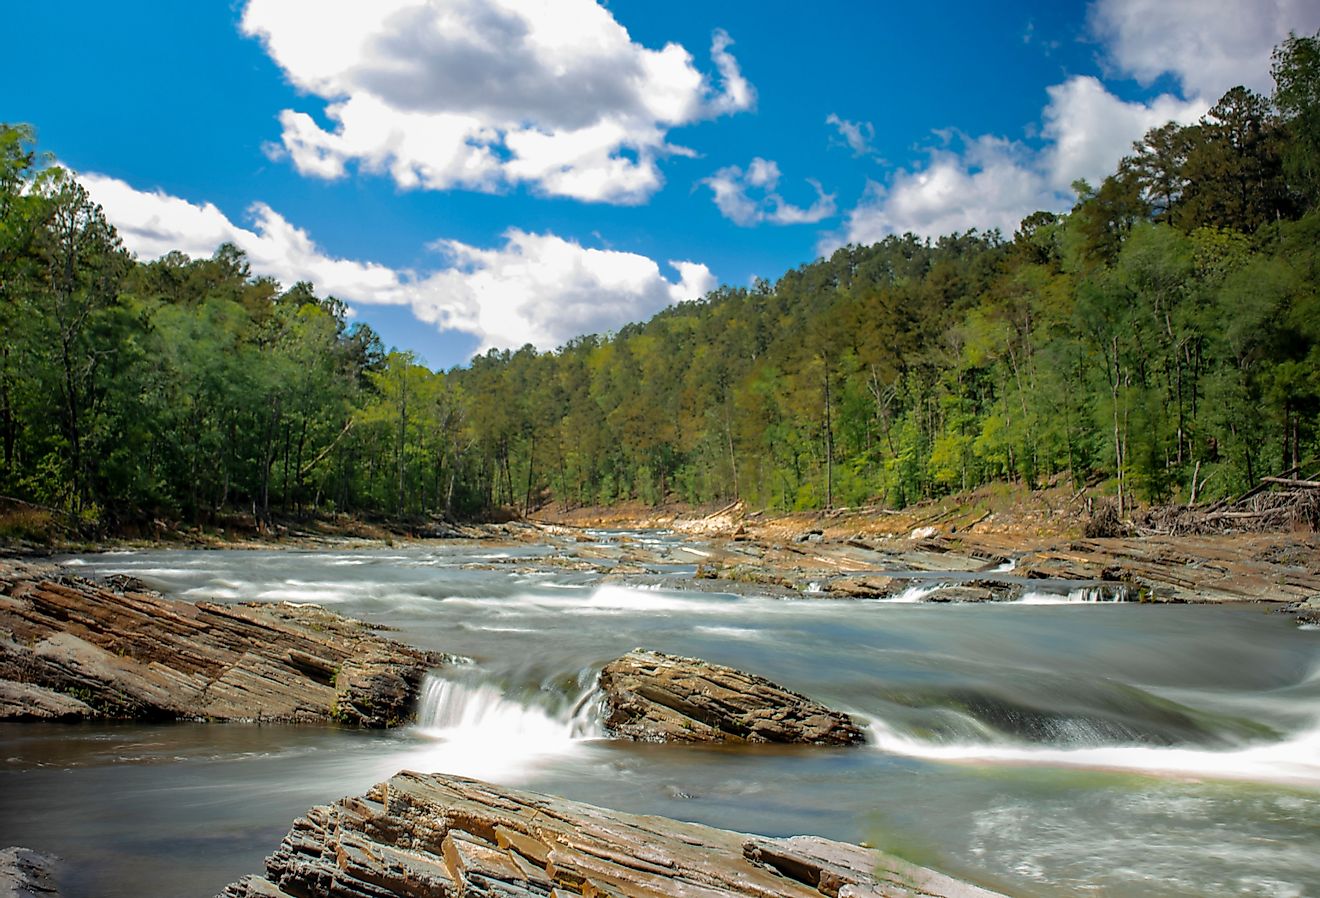 Beaver Bend State Park river view with lush forest in the background. Image credit Jordons Edits via Shutterstock.